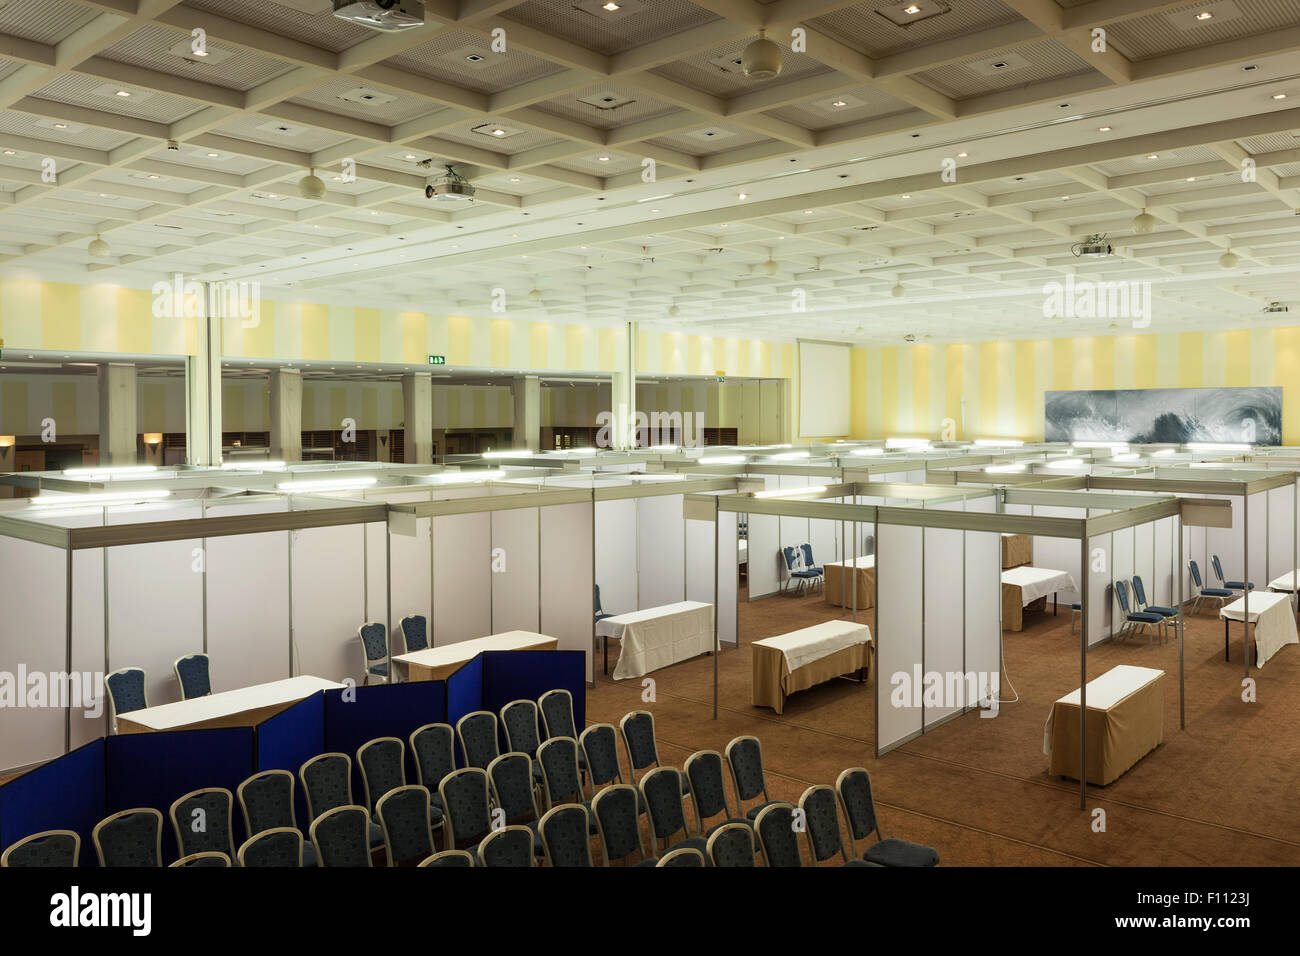 Trade show interior with booth and tables Stock Photo